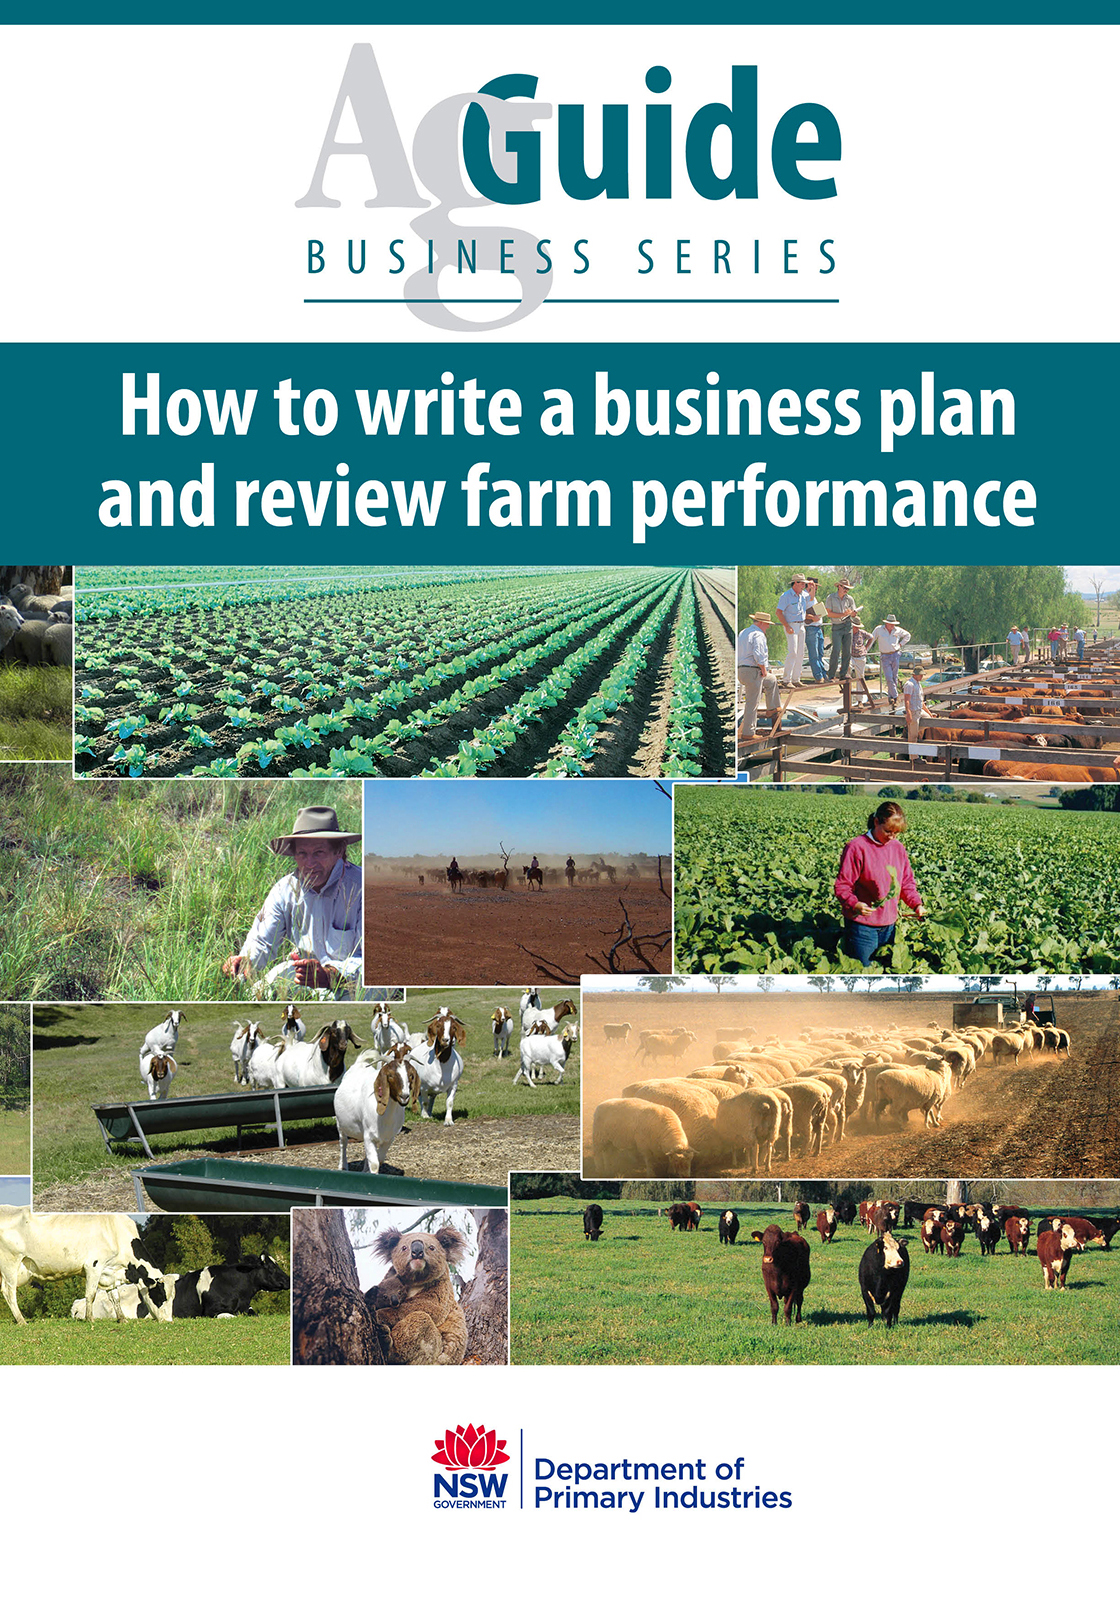 agricultural machinery business plan pdf